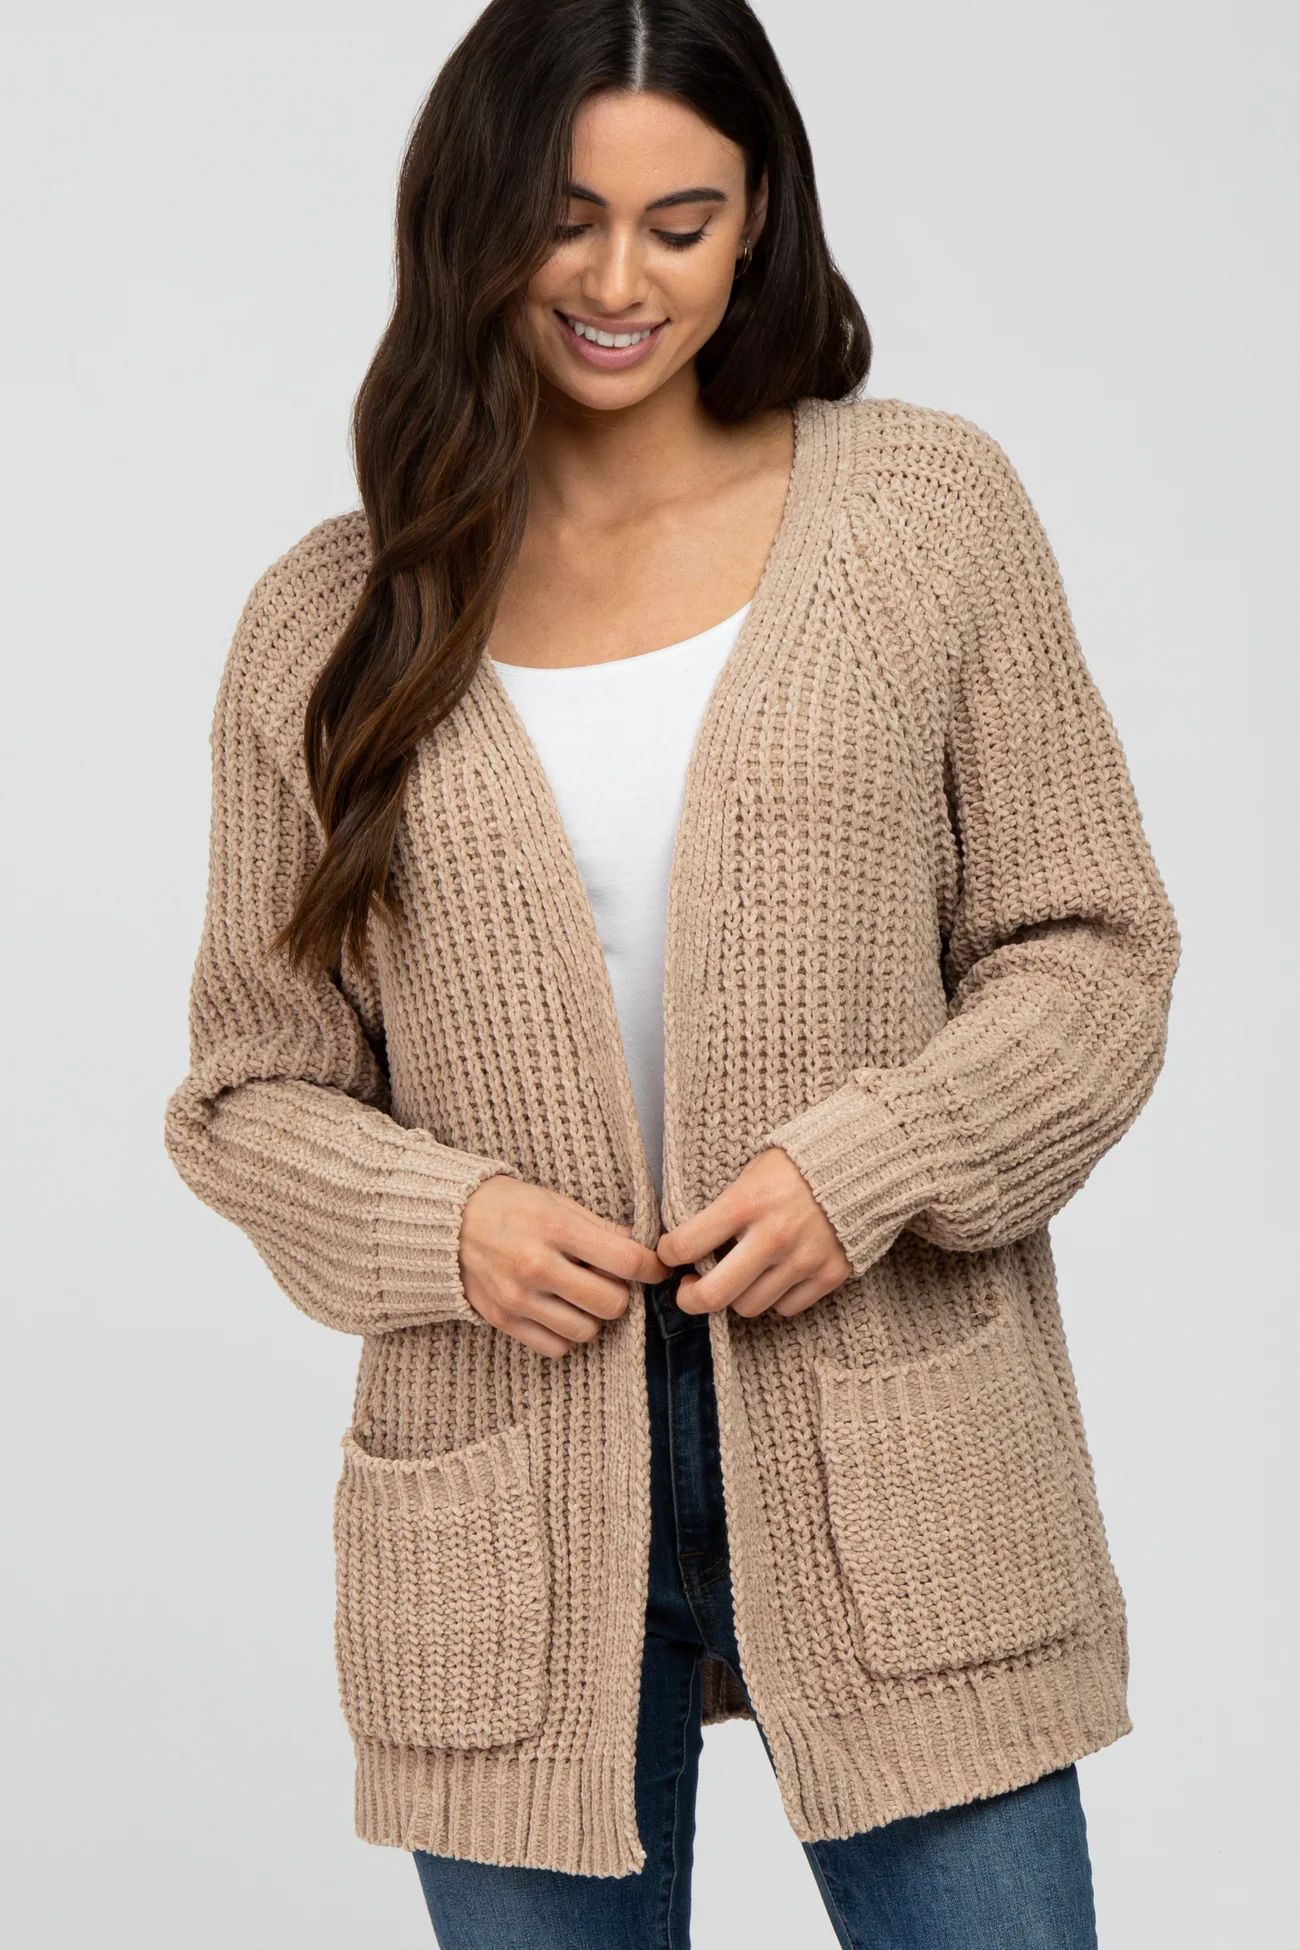 Taupe Ribbed Cable Knit Cardigan | PinkBlush Maternity